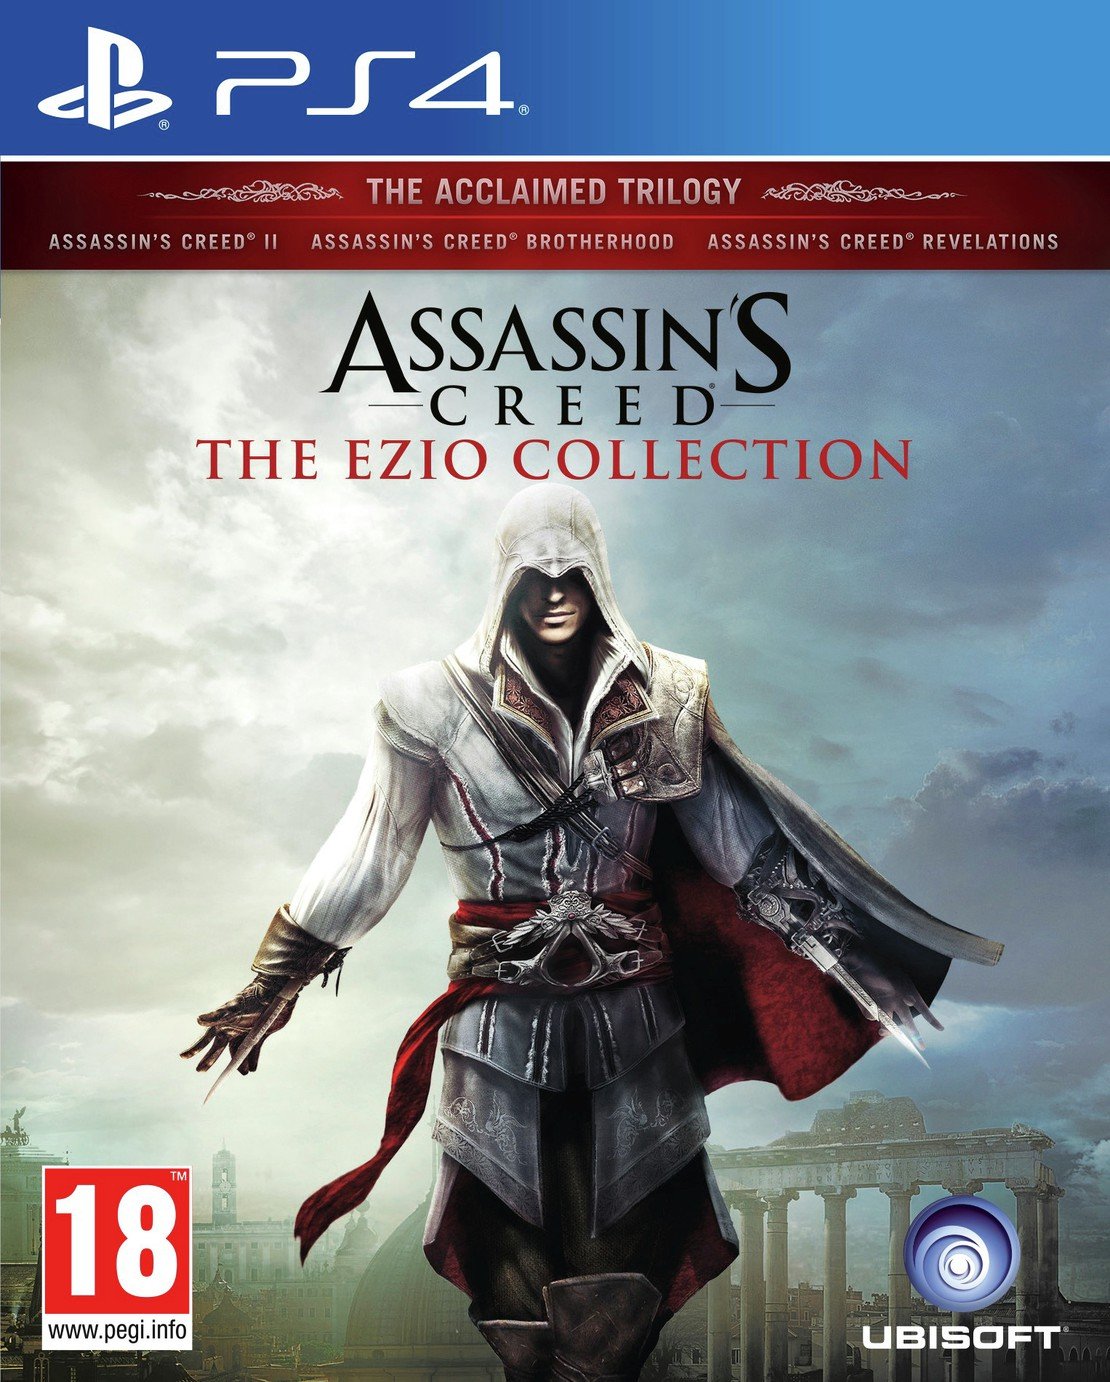 Assassins Creed - The Ezio Collection - PS4 Game Review